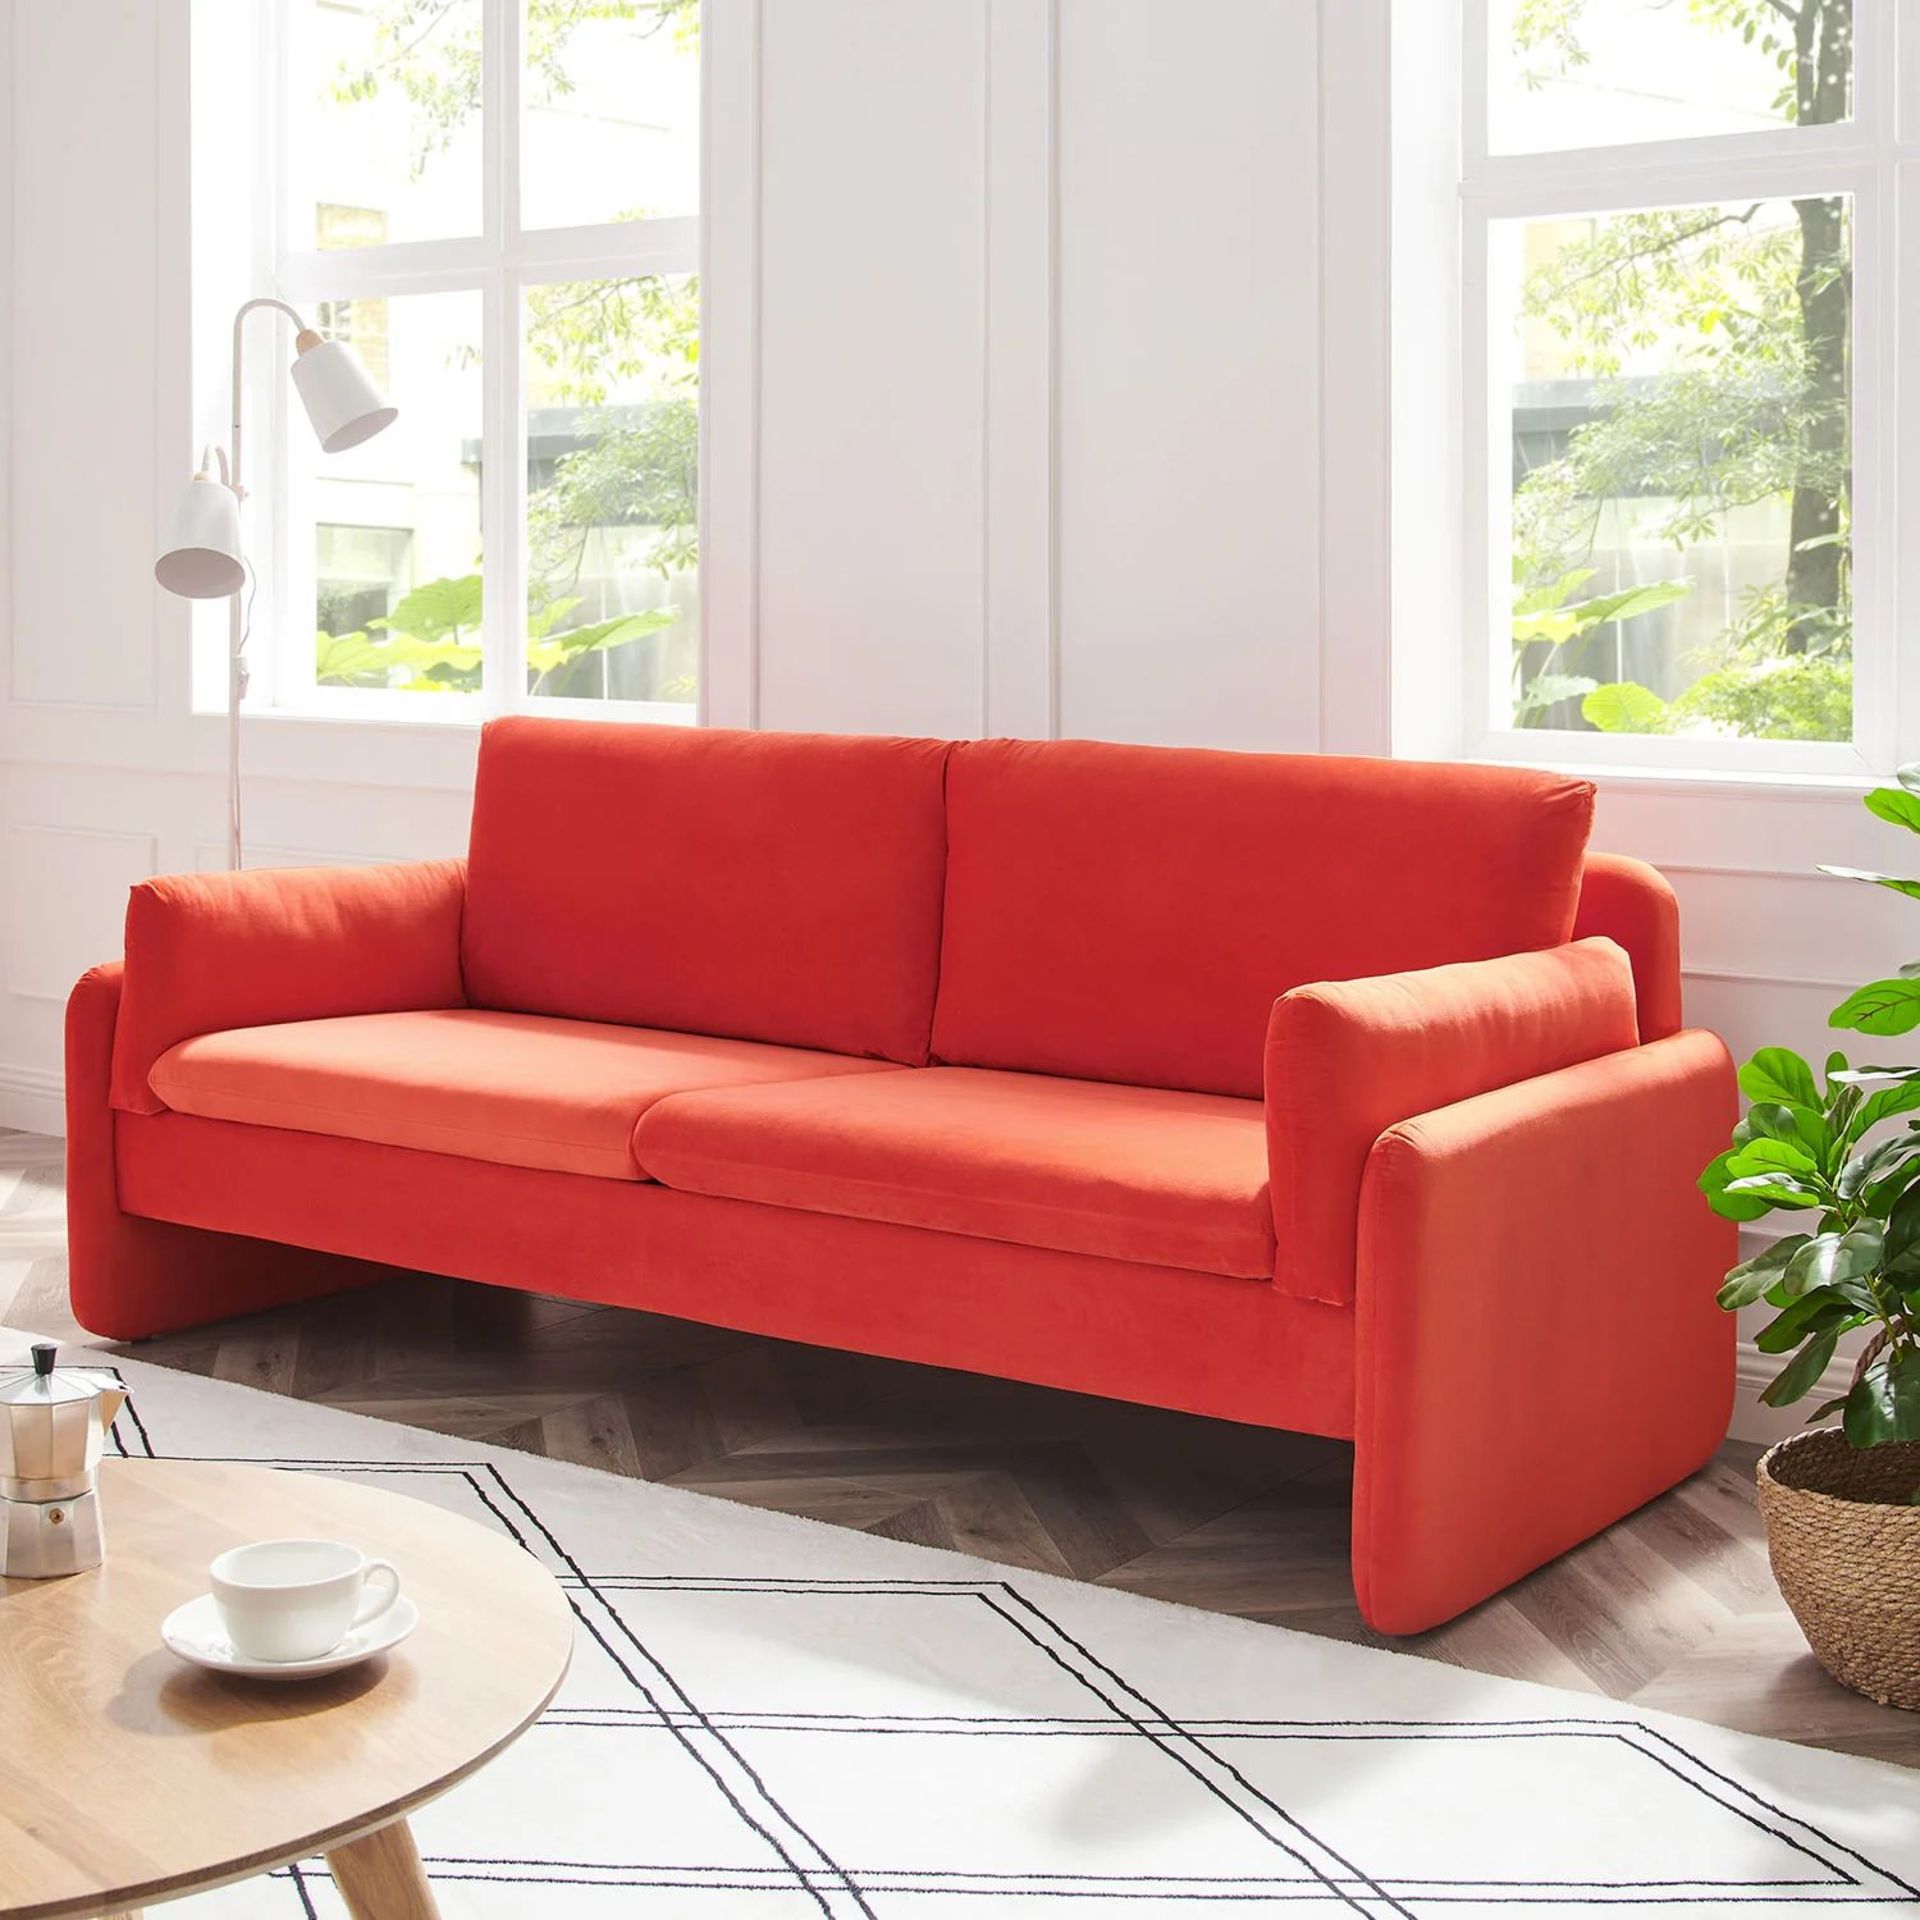 Clapham 3-Seater Flaming Orange Velvet Fabric Sofa. - R14. RRP £659.99. With s-shaped coil wrapped